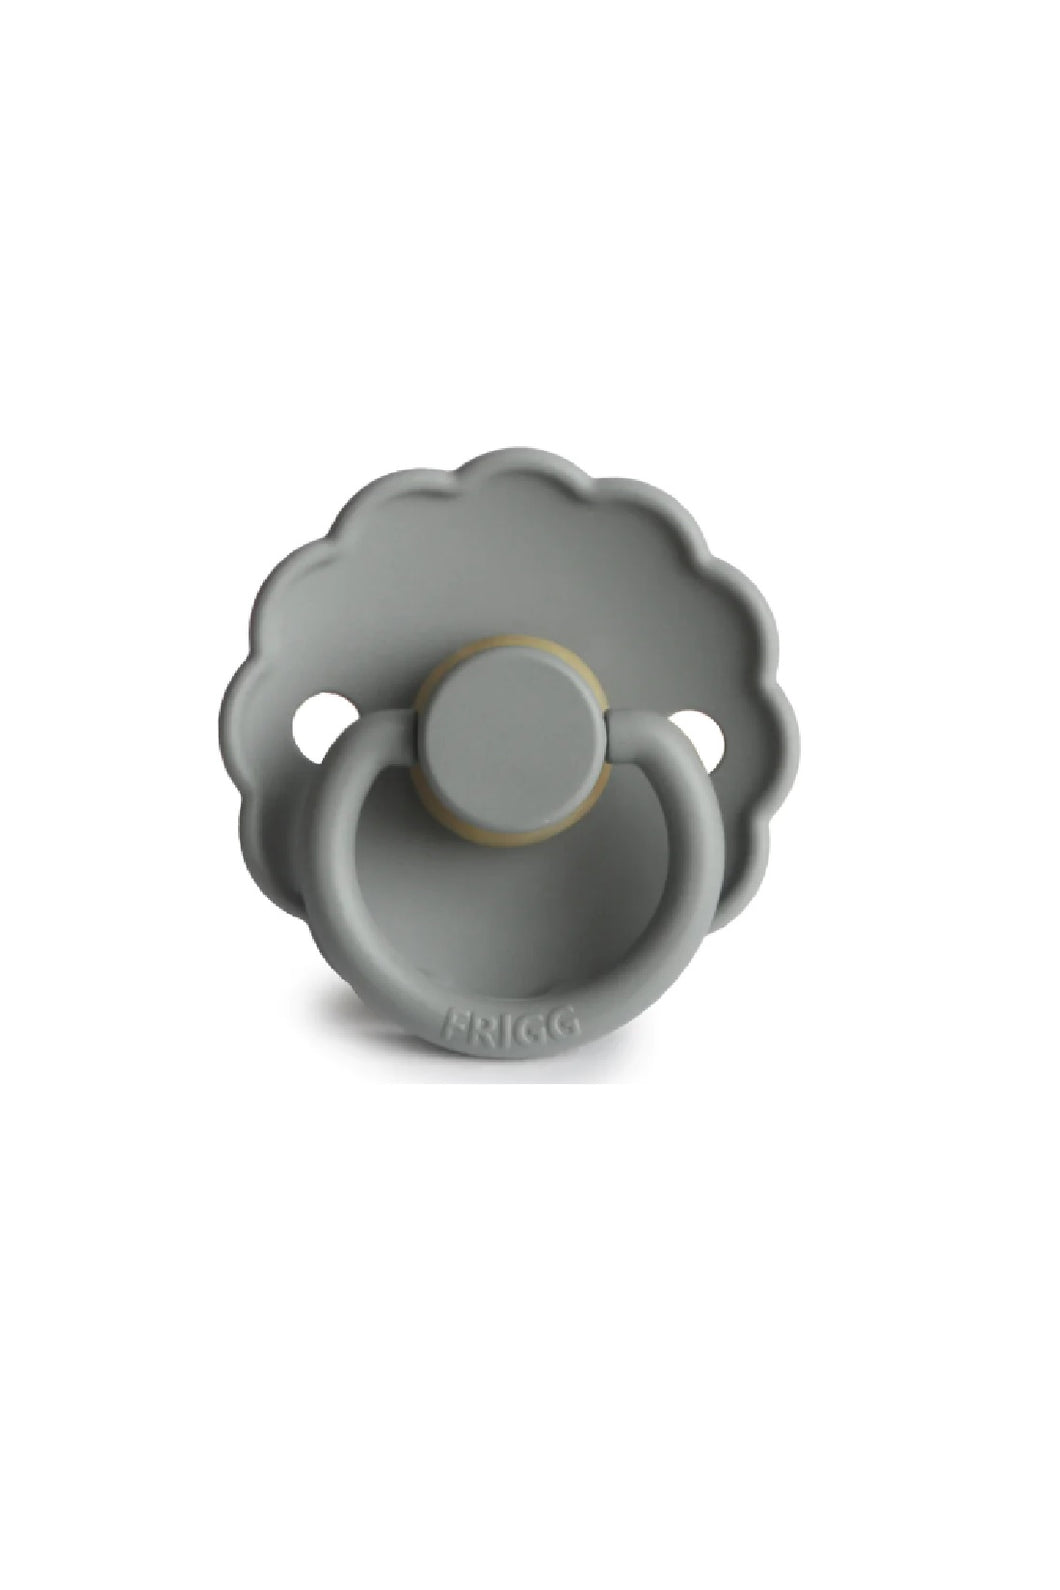 Frigg Daisy Natural Rubber Pacifier - French Gray